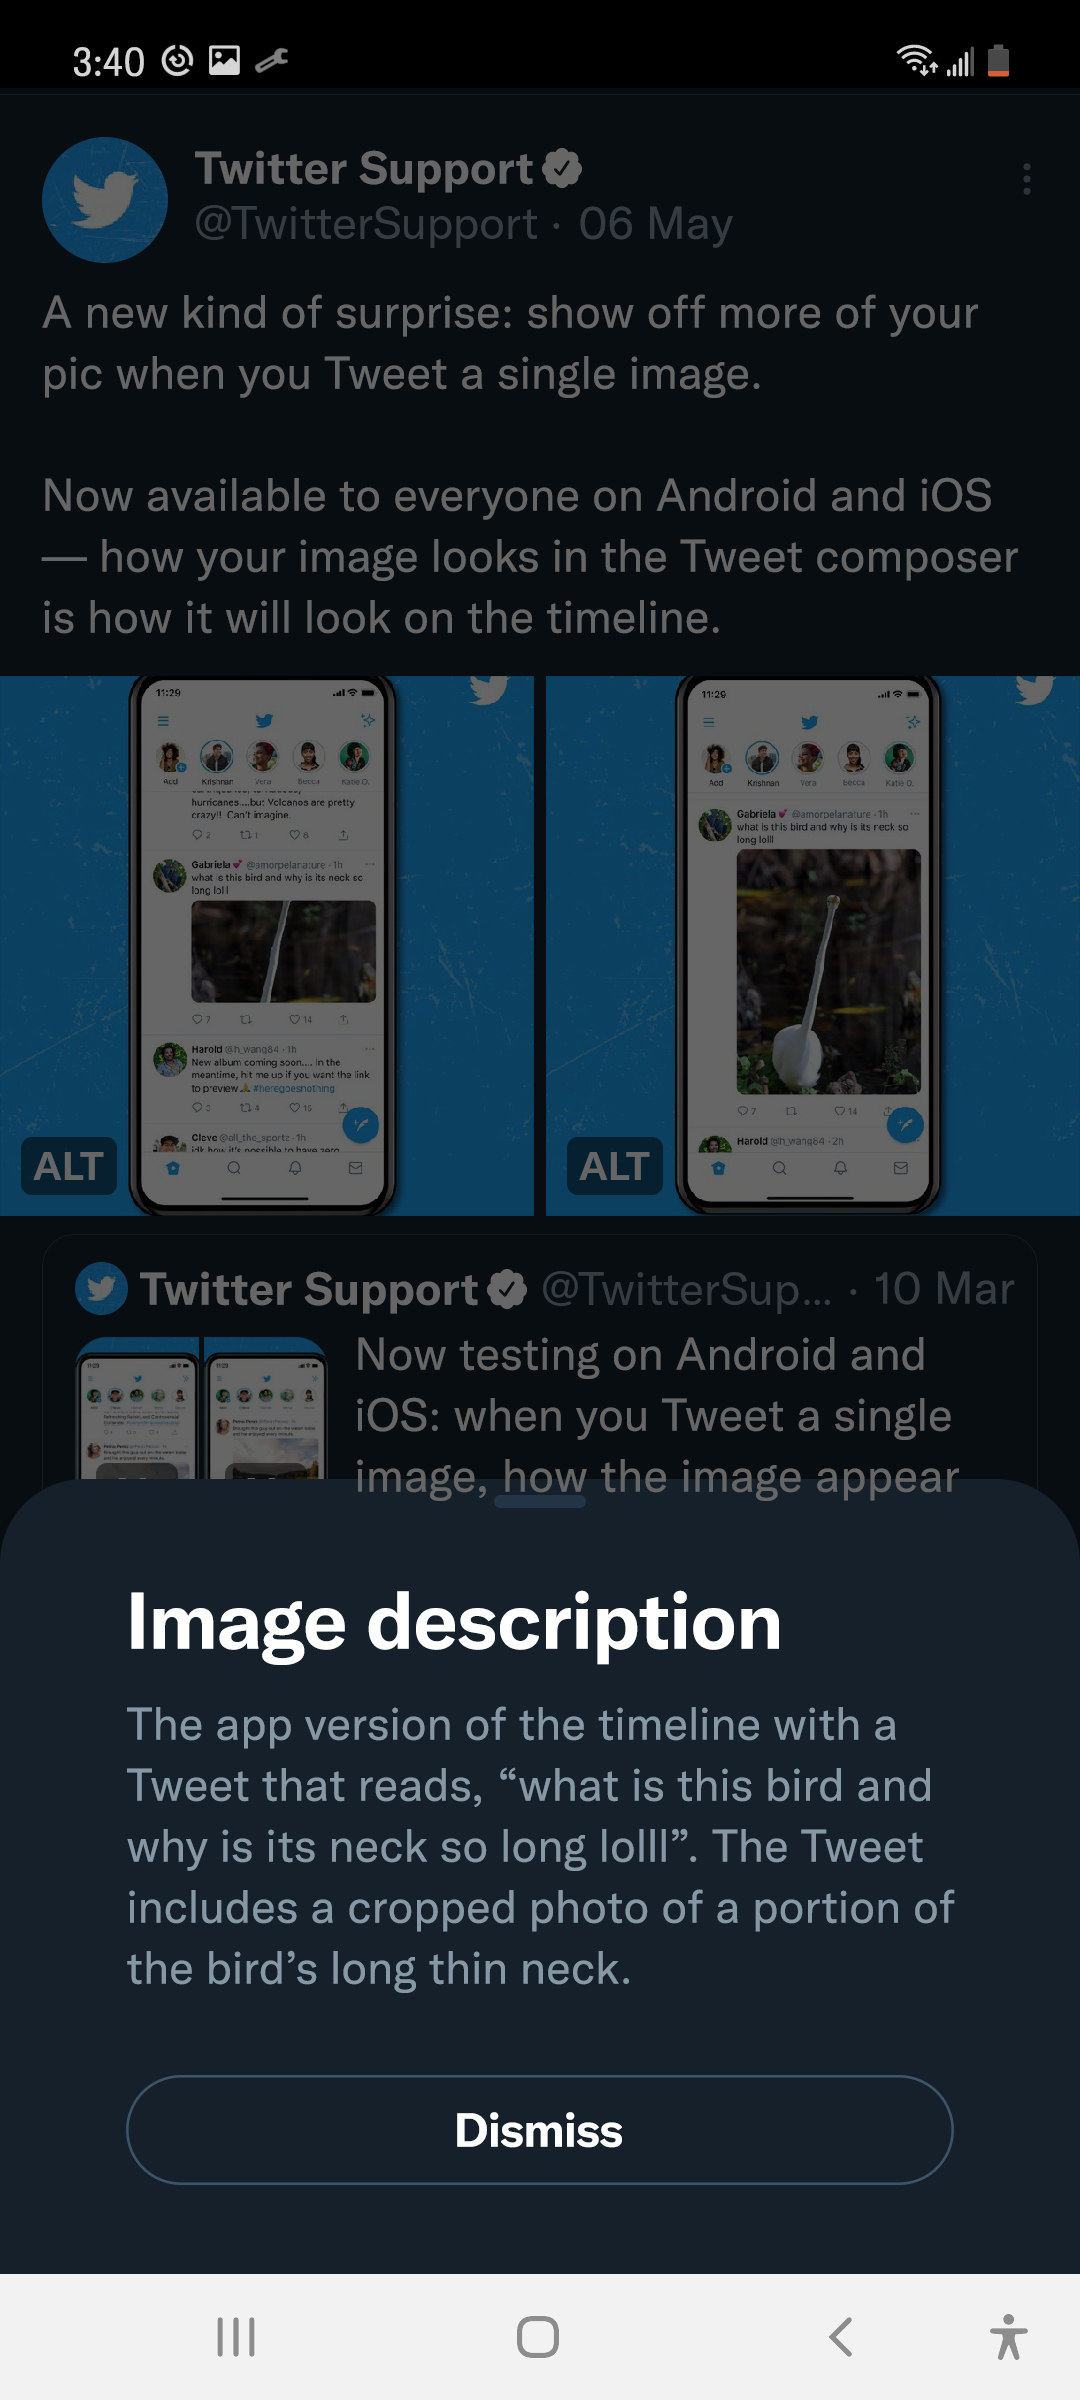 How to Download GIF from Twitter on Android, iPhone & Web